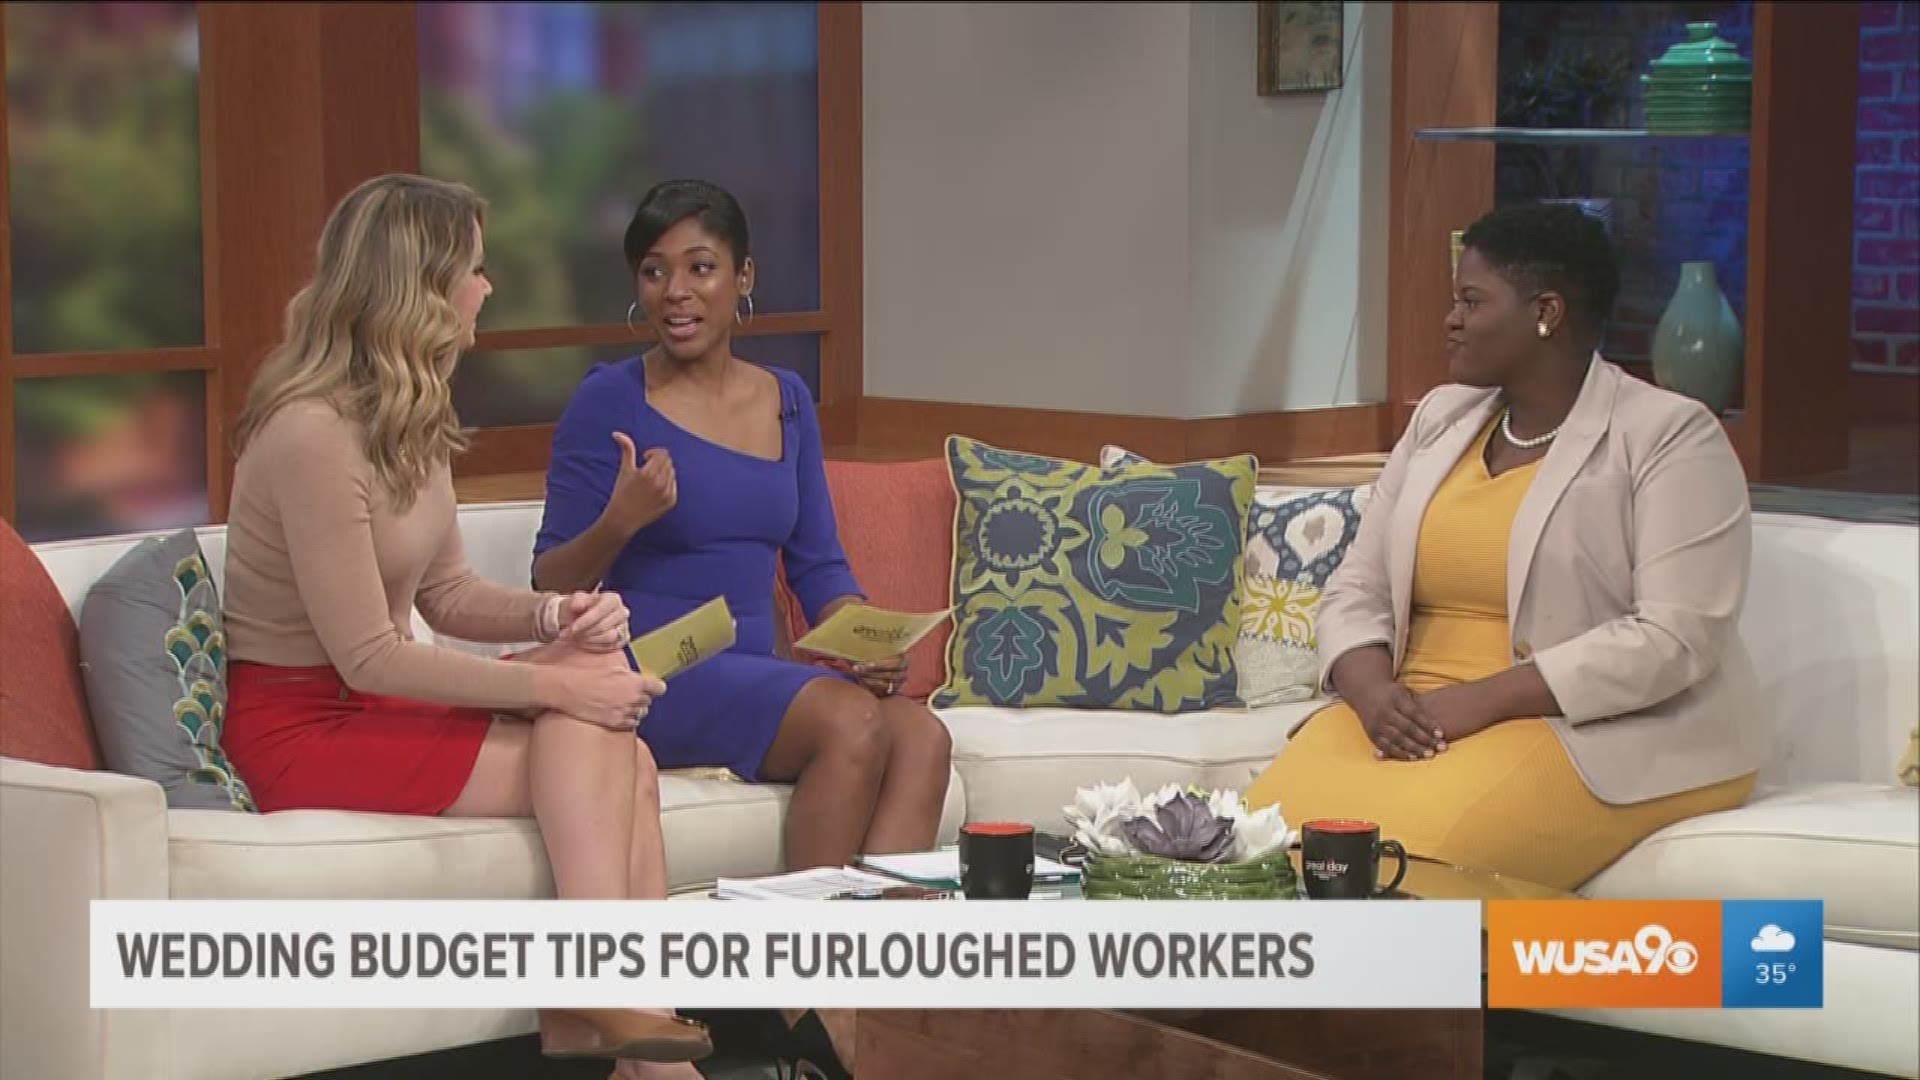 CEO of Exemplary Designs Valencia Warren shares tips to help budget your wedding if you are feeling the financial squeeze during the shutdown.